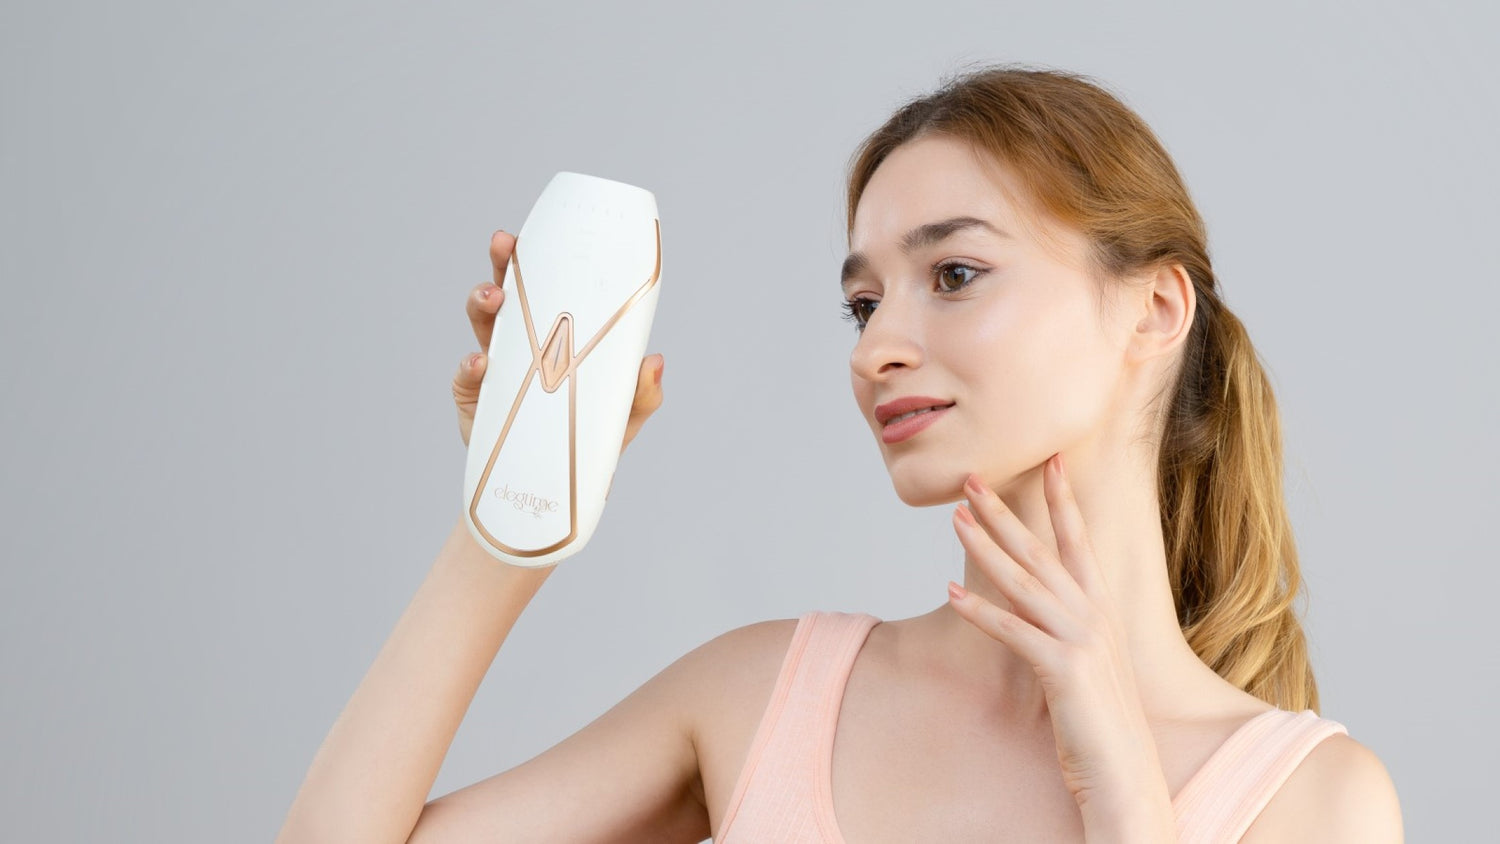 No More Fuss: 5-Minute Hair Removal Methods for Busy People